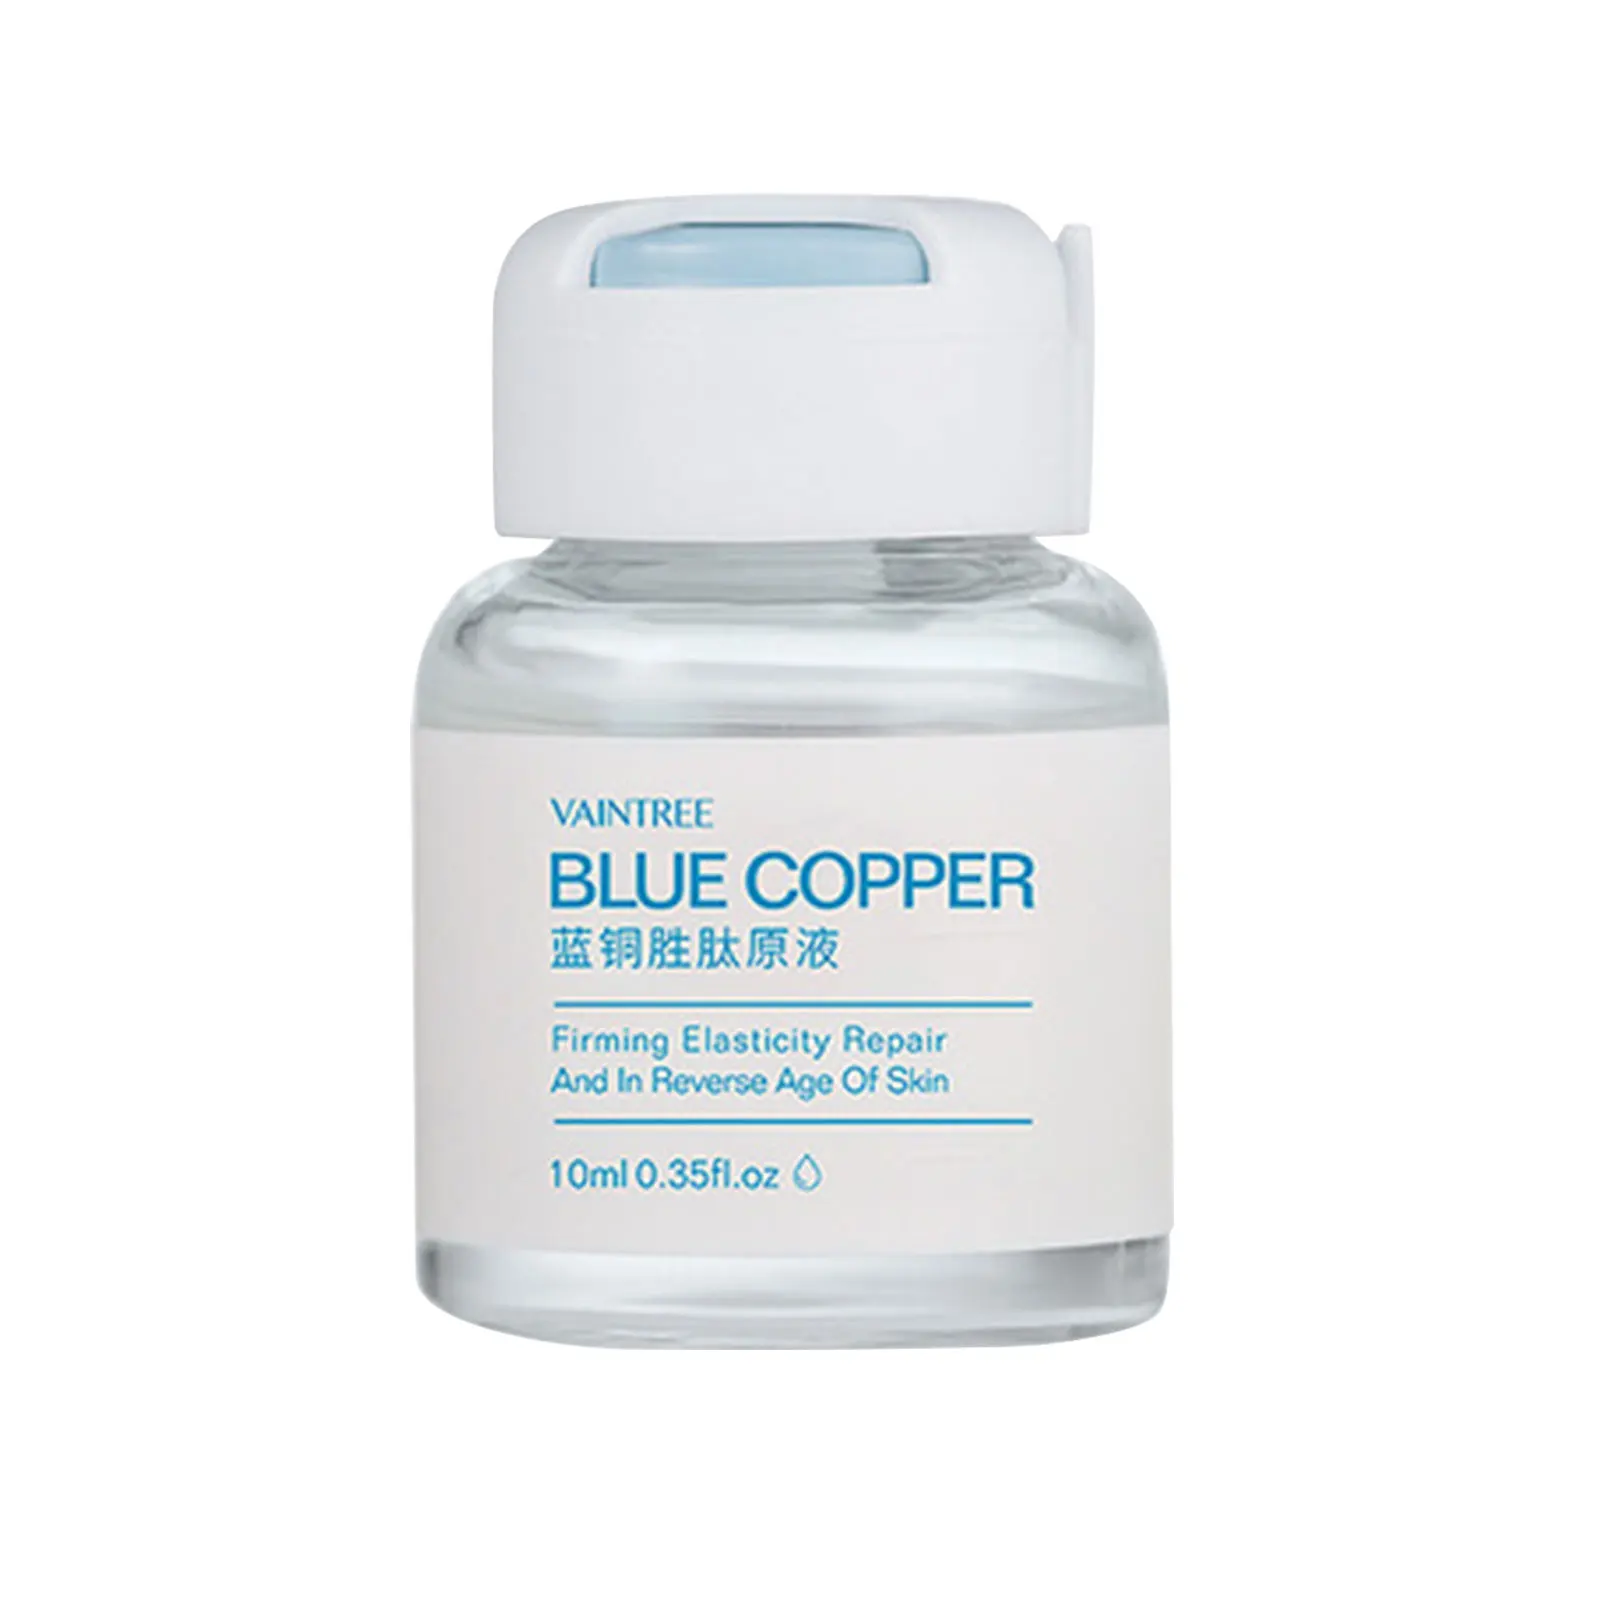 

Blue Copper Peptide Face Serum microneedle Hydrating Moisturizing Repair Soothing Lifting Firming Anti-Aging Essence skin care